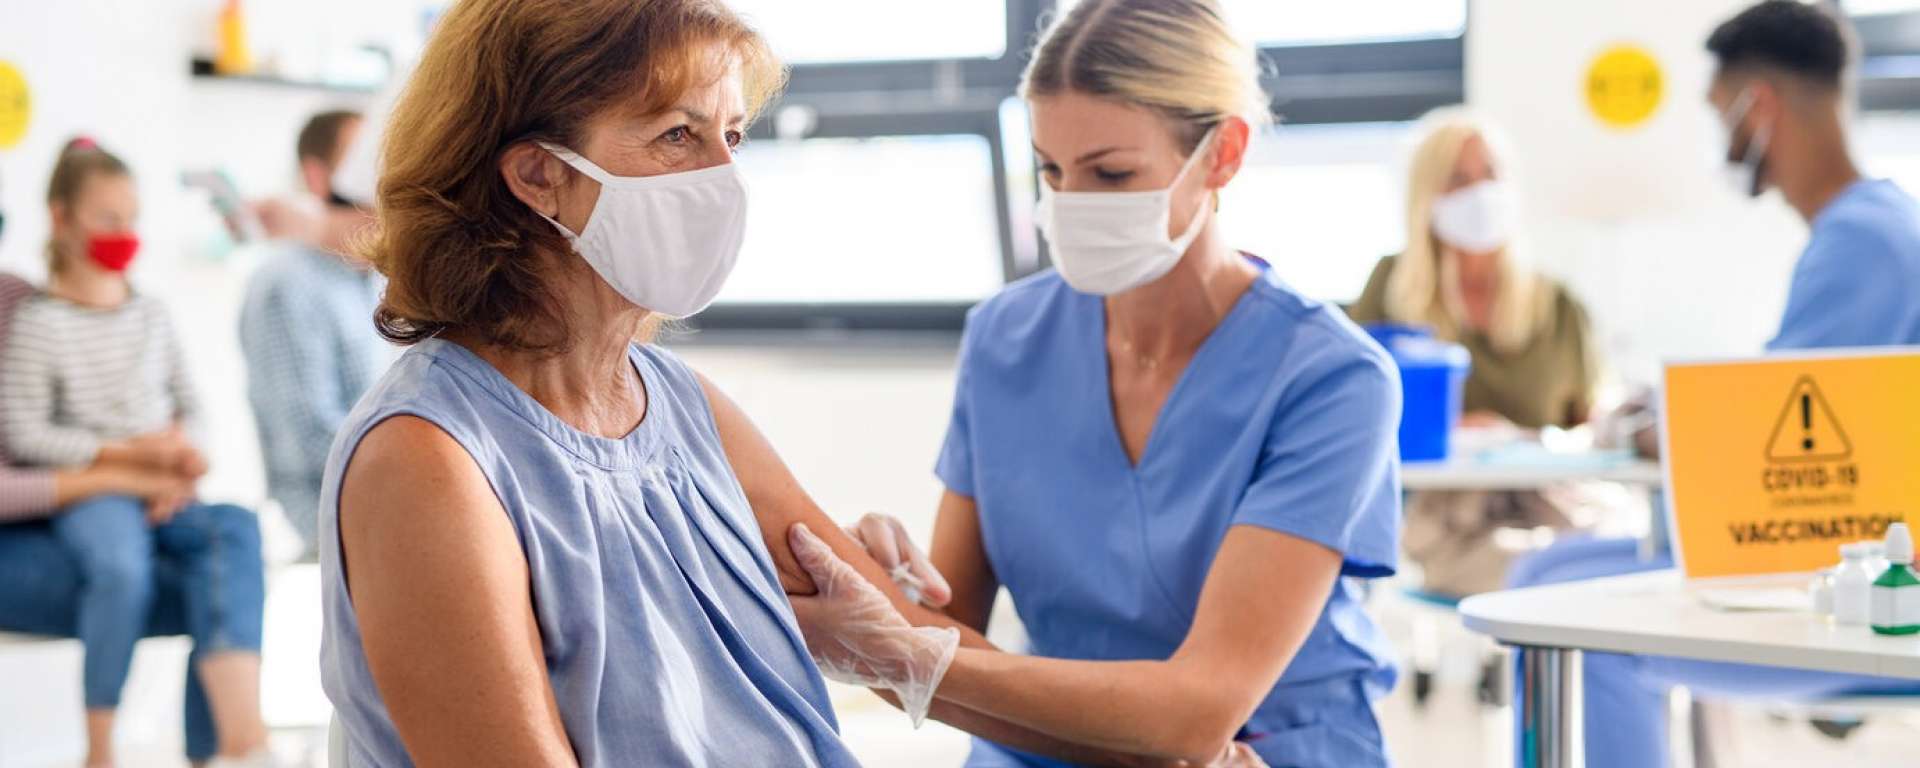 Mature woman in blue getting a vaccination injection from a nurse